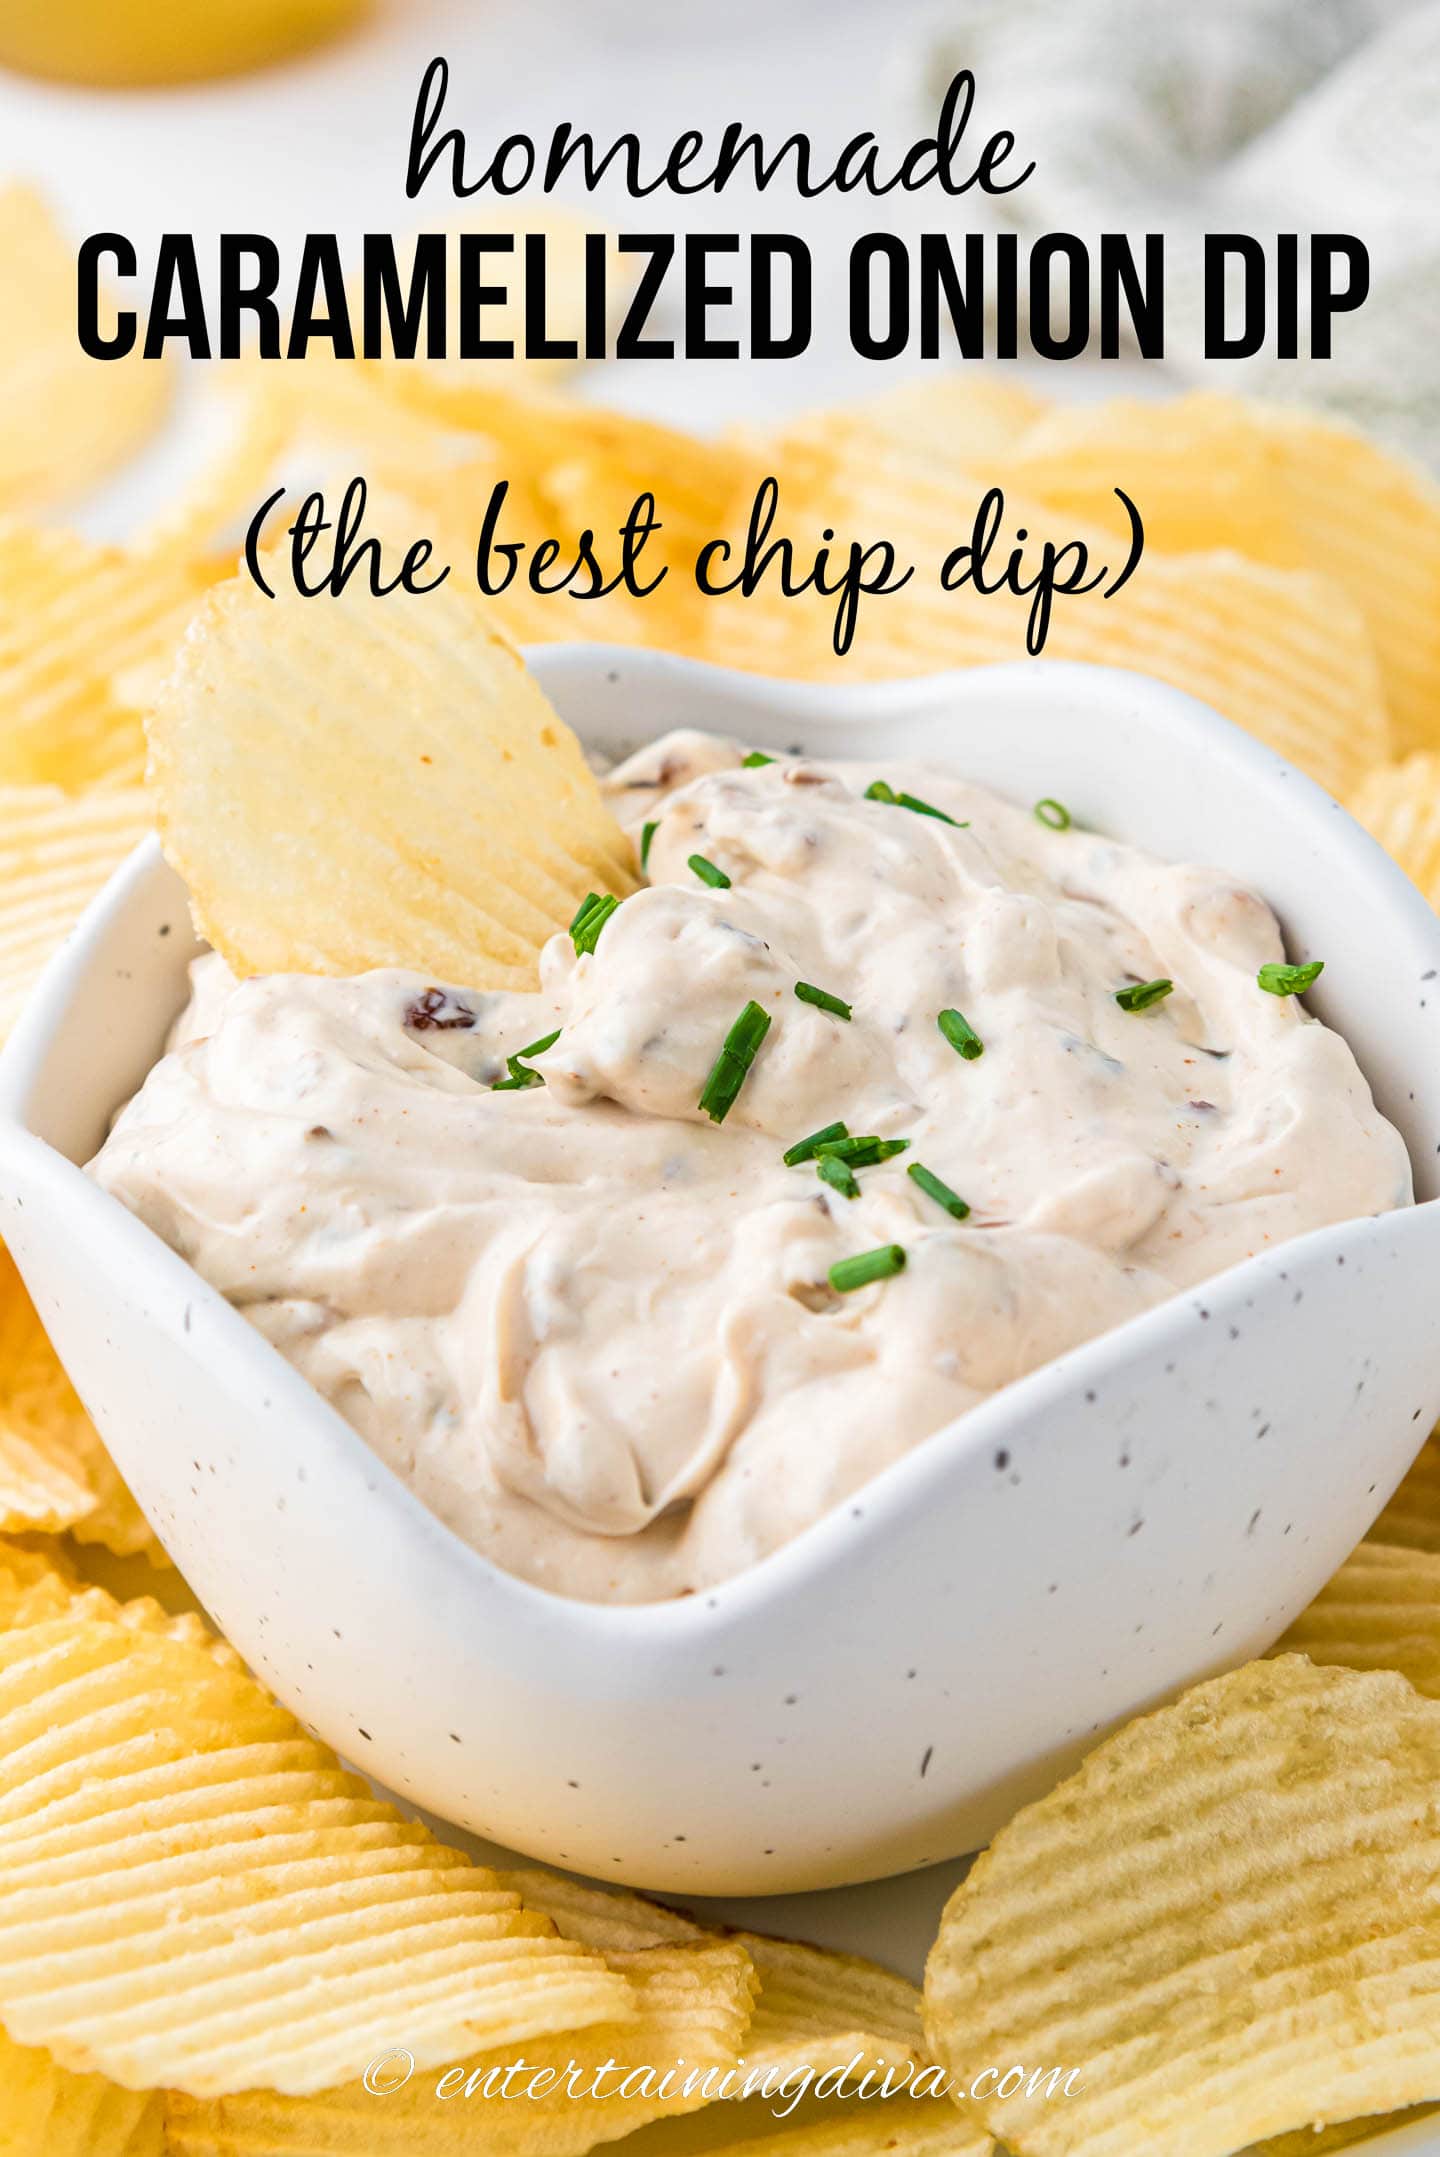 homemade caramelized onion dip (the best chip dip)